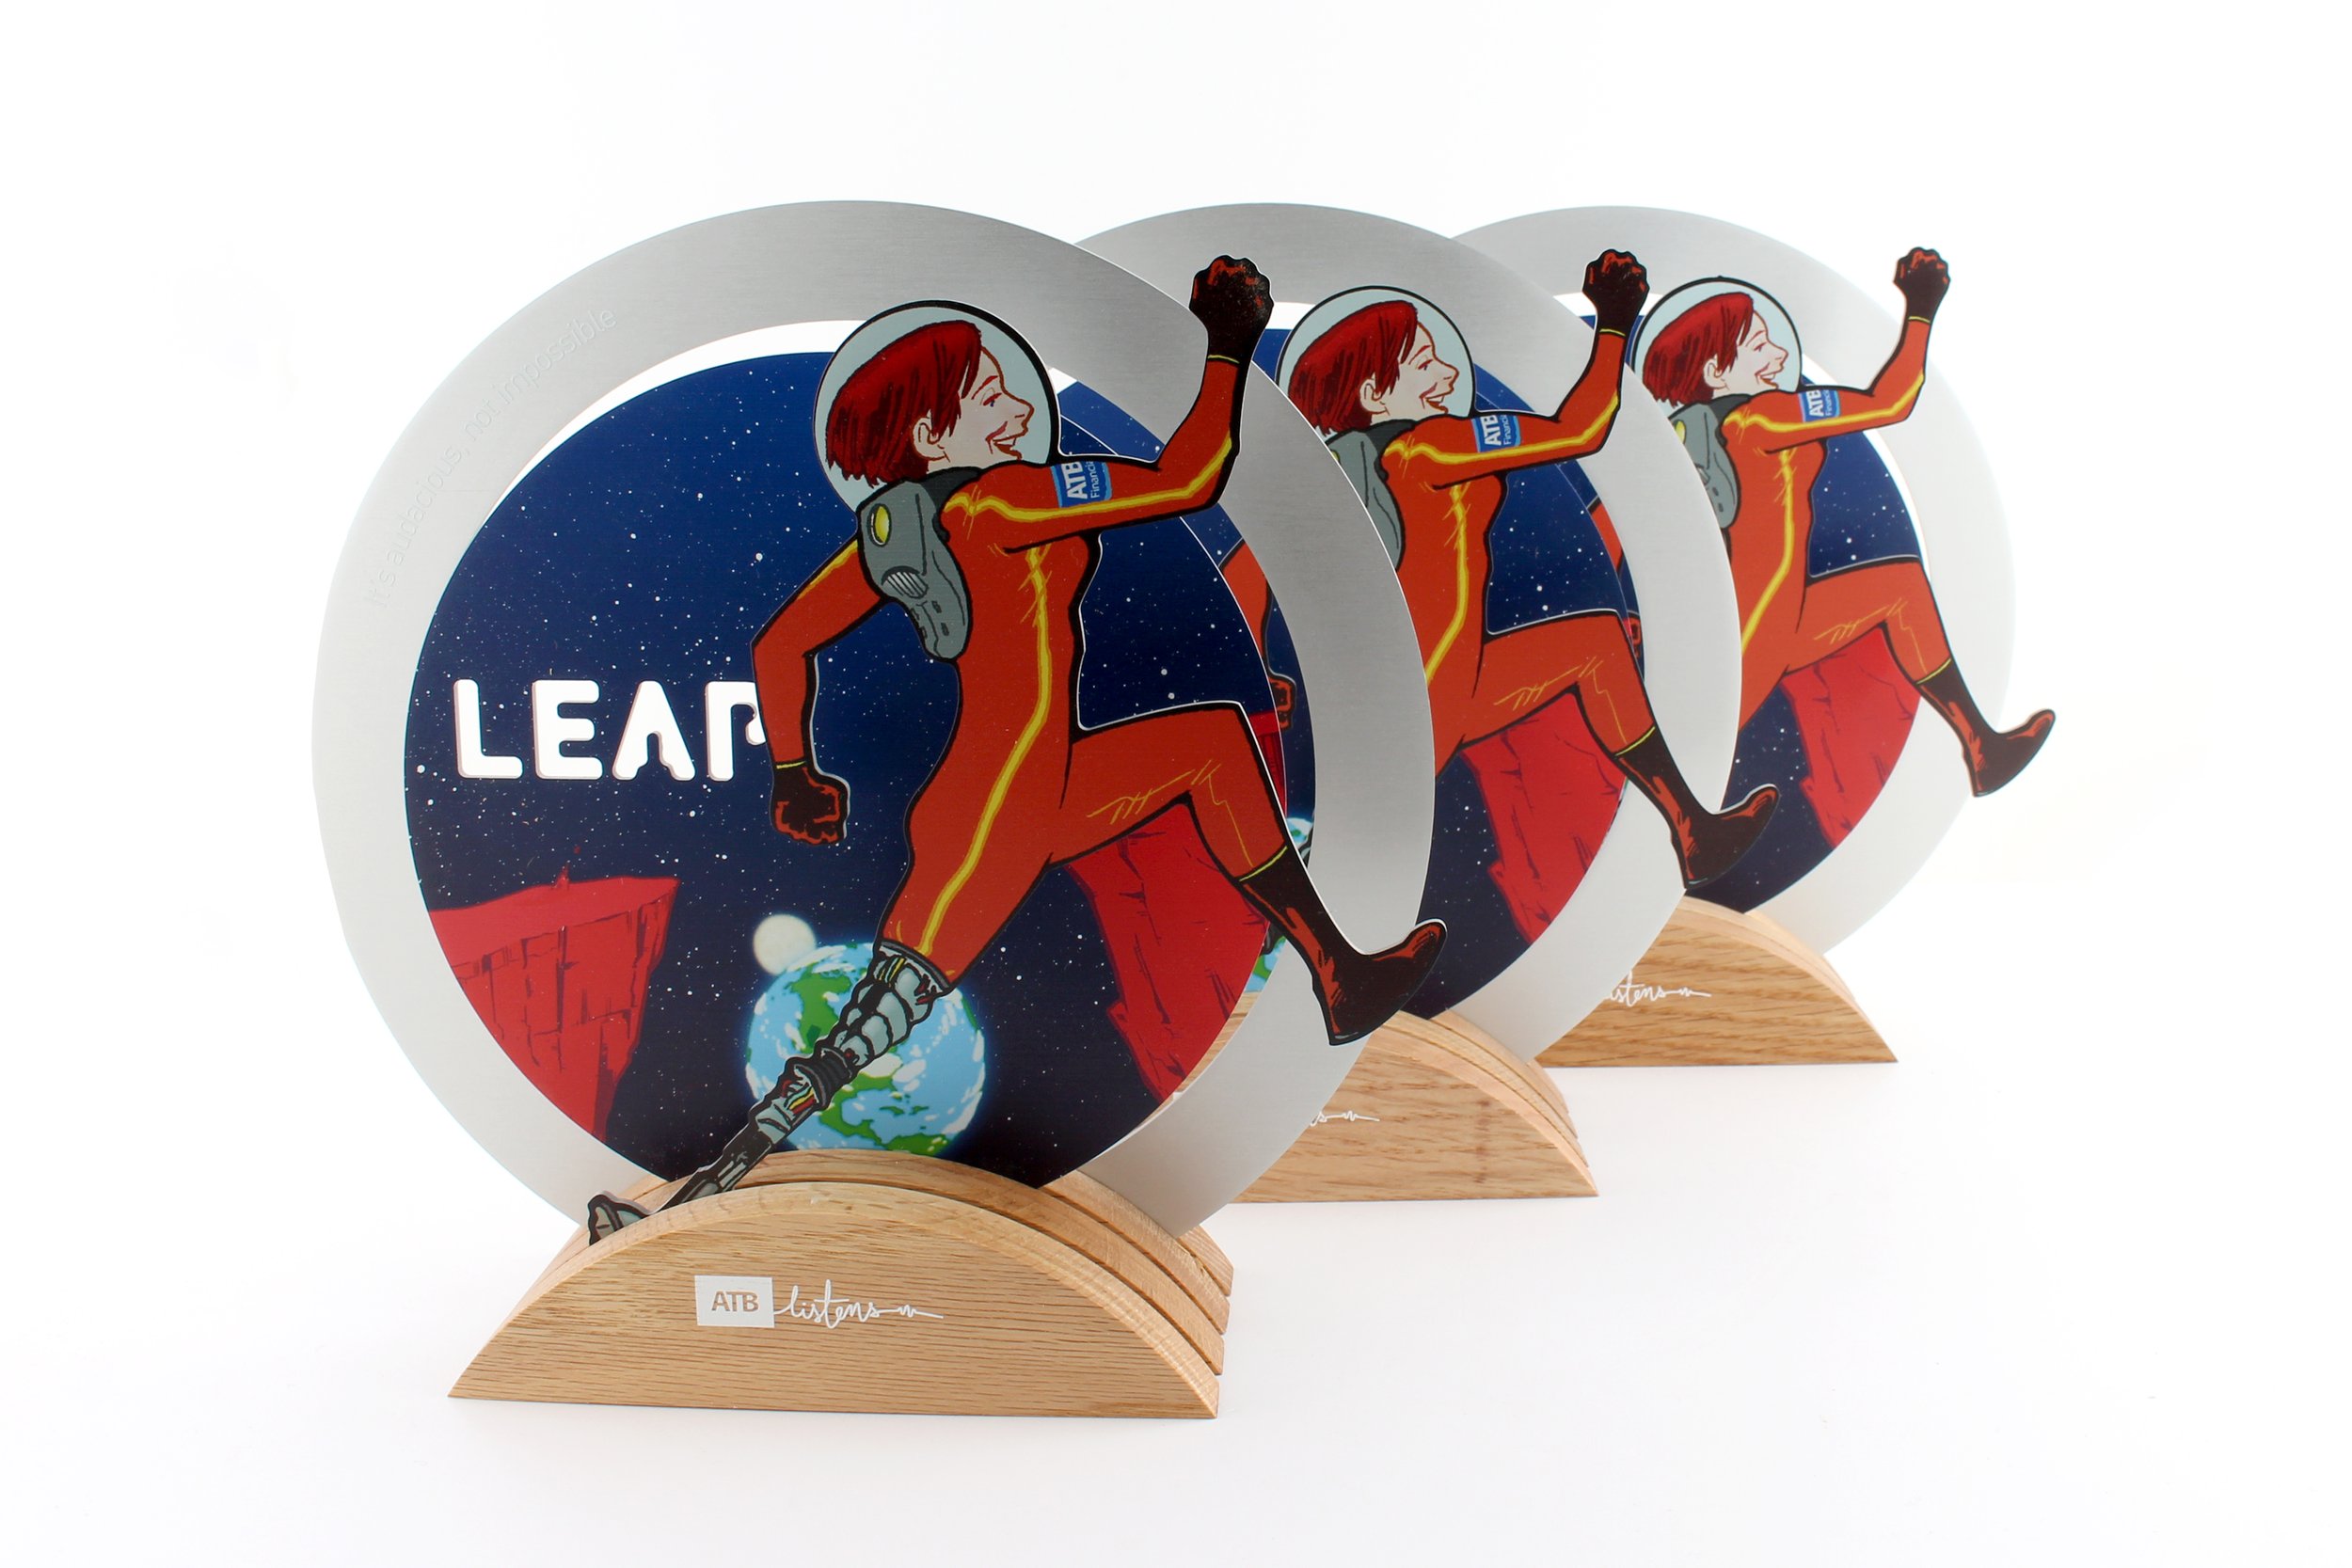 ATB leap awards for staff appreciation and workplace event high quality creative design 2